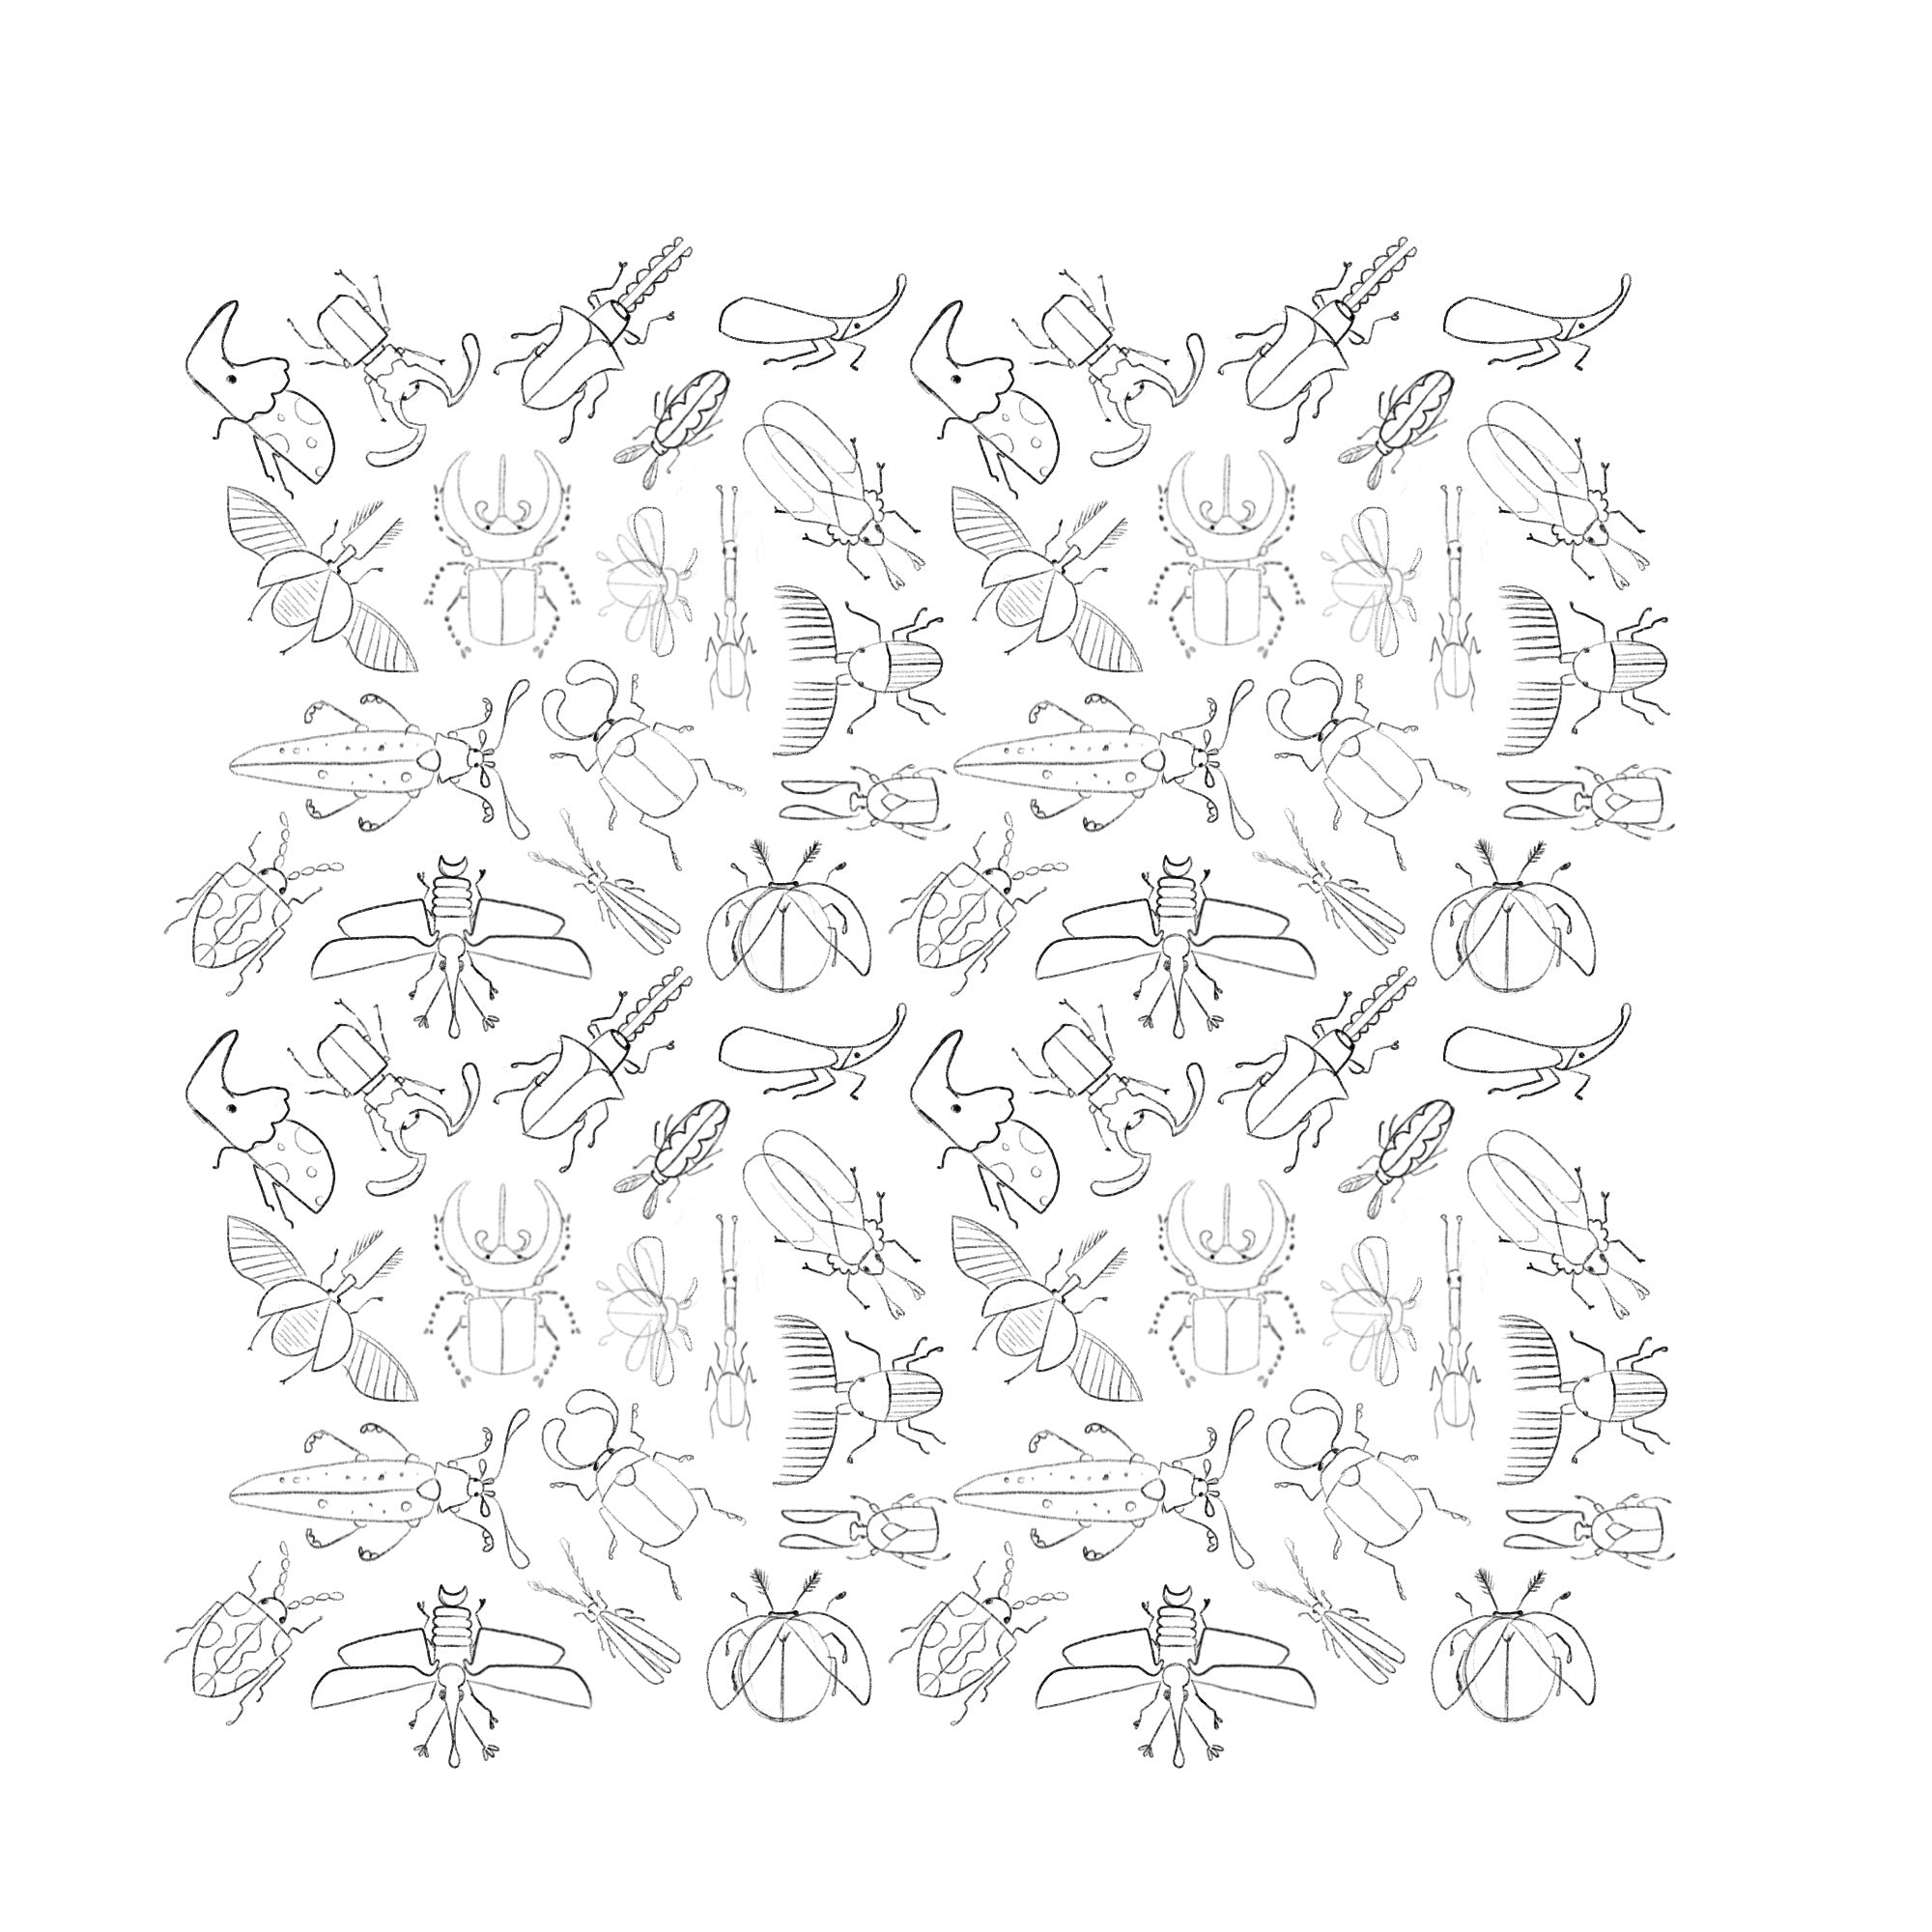 line drawing sketch of a repeating pattern of bugs